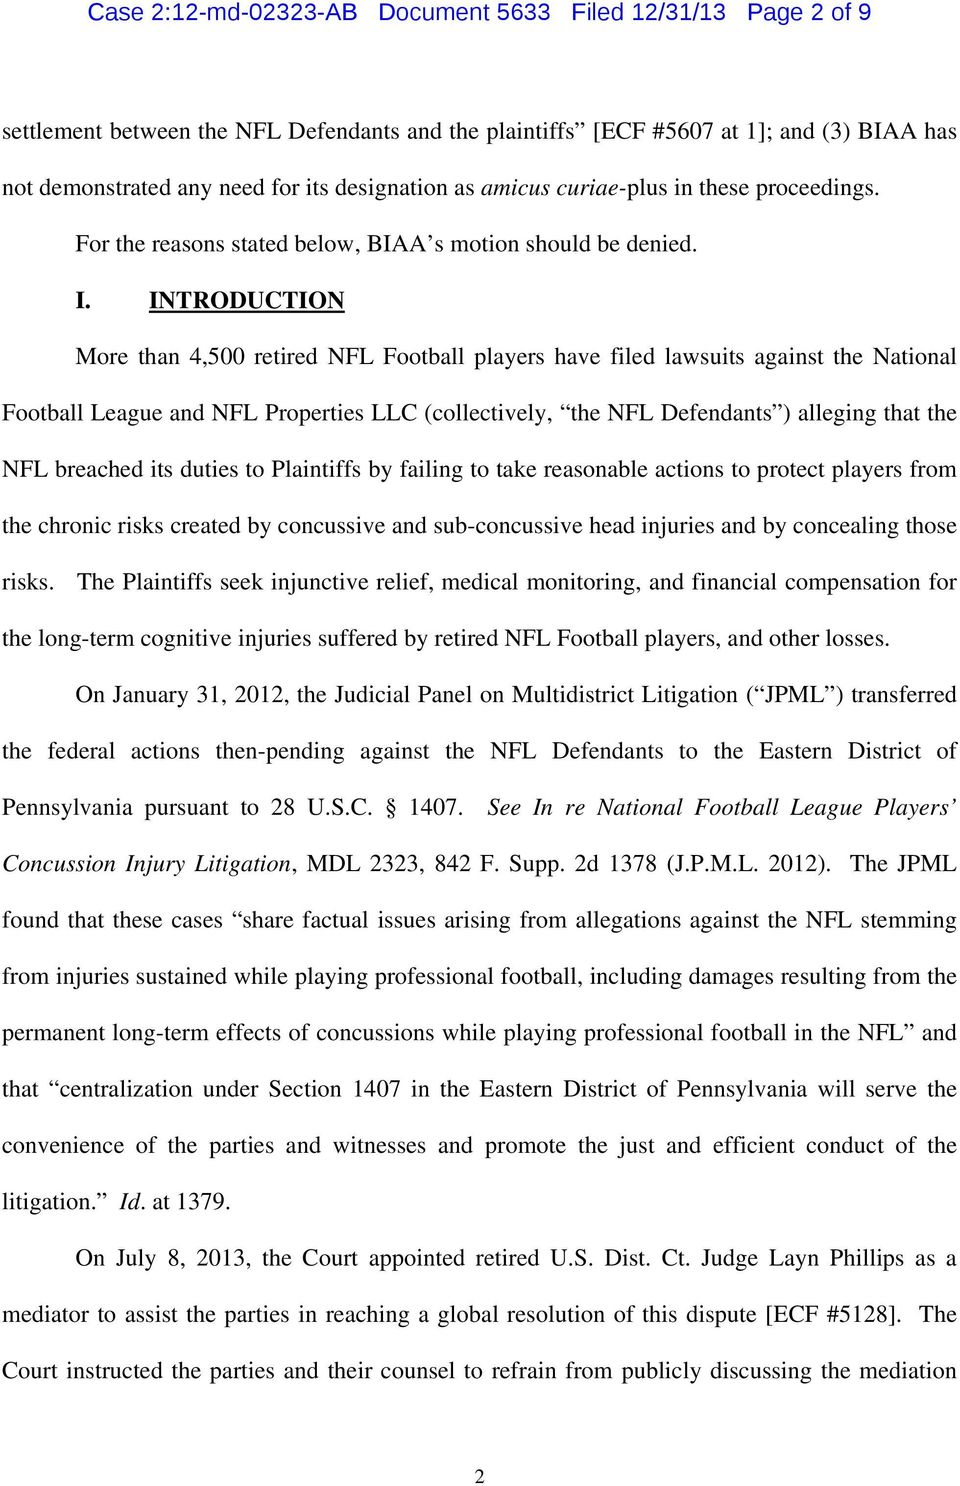 INTRODUCTION More than 4,500 retired NFL Football players have filed lawsuits against the National Football League and NFL Properties LLC (collectively, the NFL Defendants ) alleging that the NFL